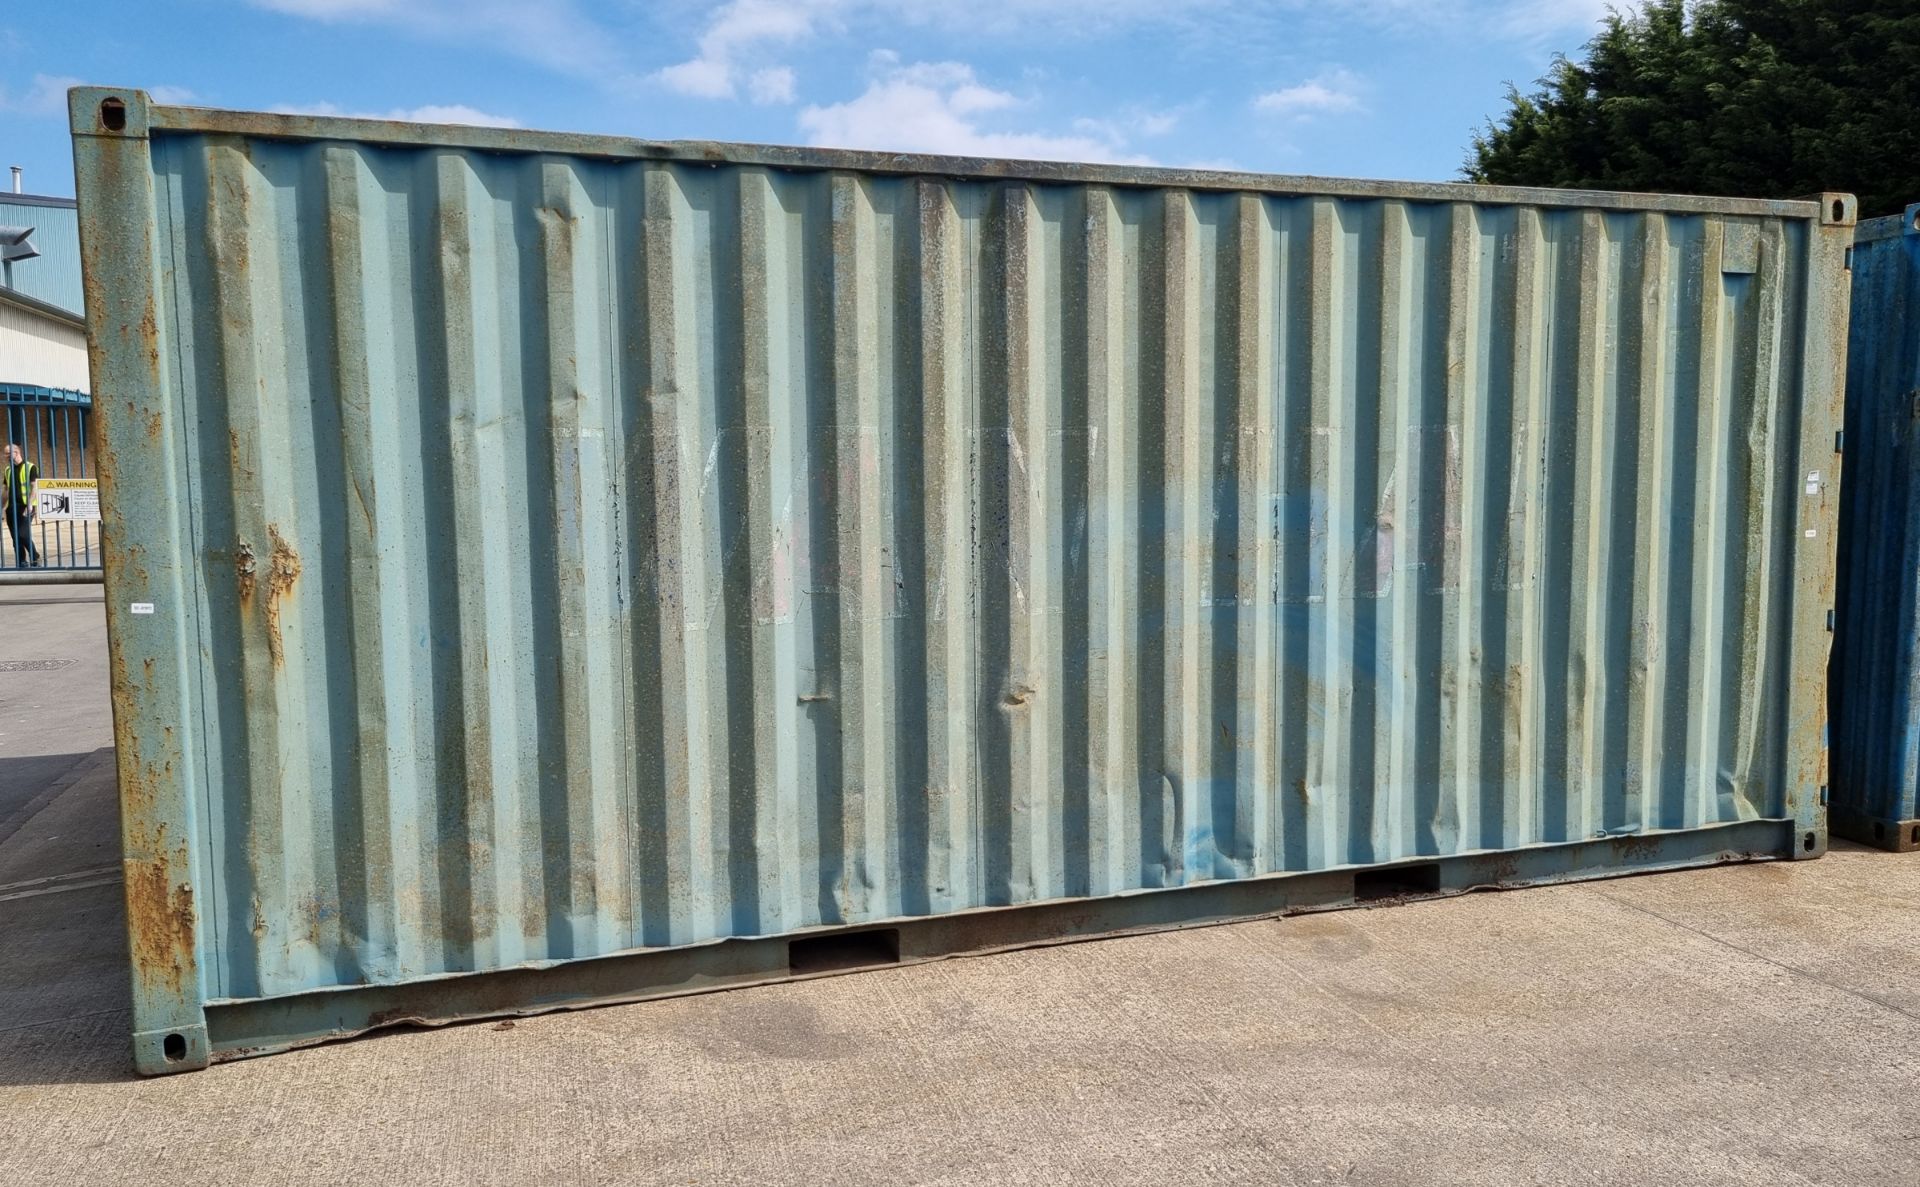 20ft shipping and storage container - L 20ft x W 8ft x H 8ft